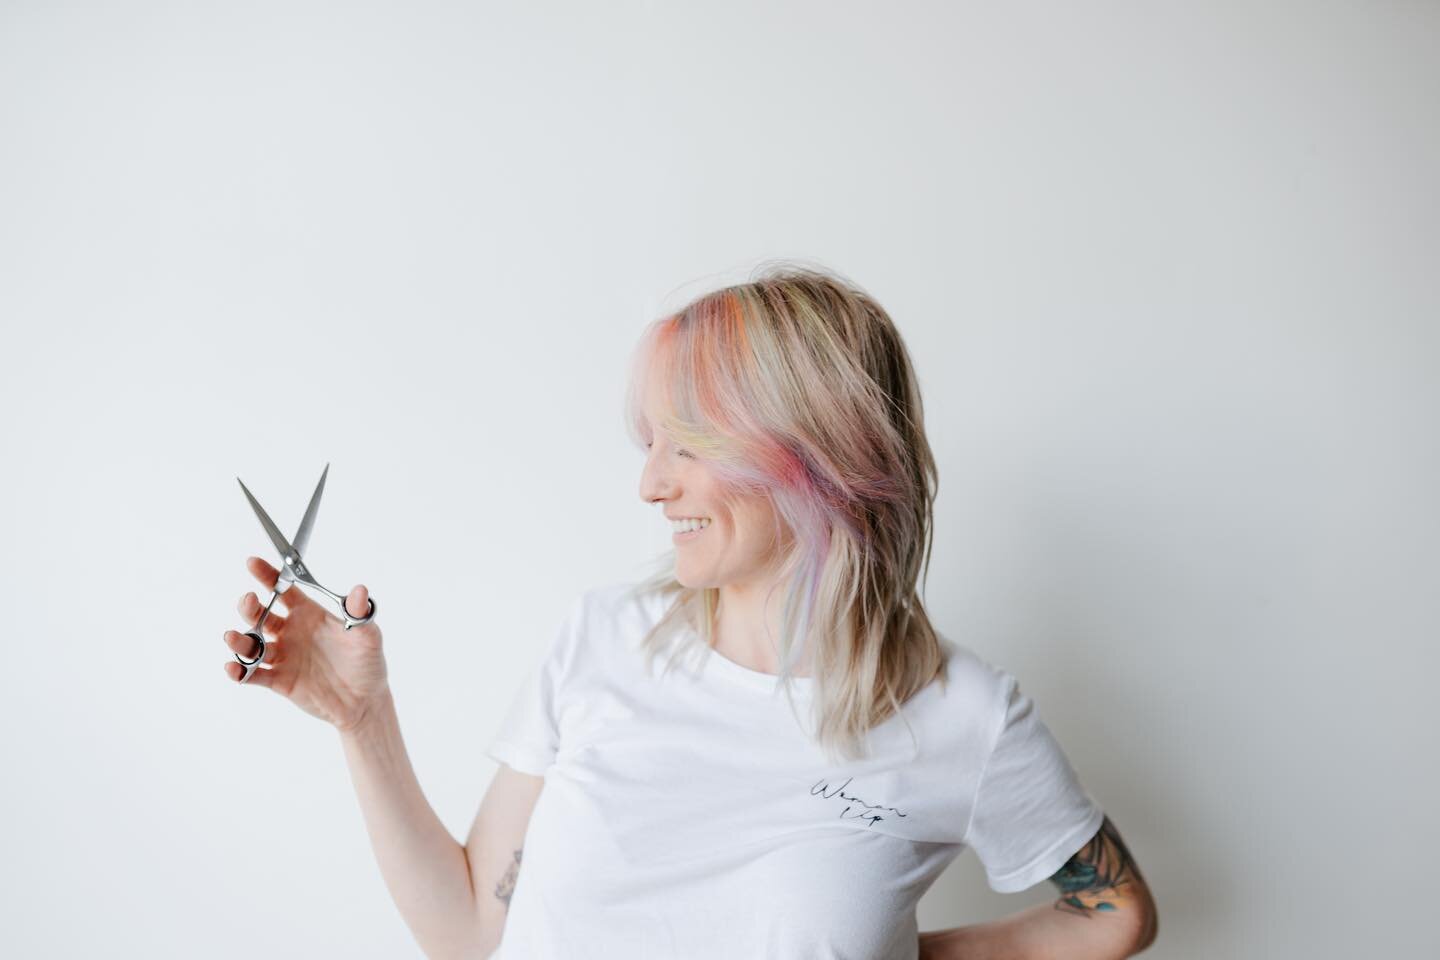 I love the feeling of scissors in my hands. I think my coolness factor increases by like 10 points when I&rsquo;m holding them (But maybe that&rsquo;s just me). I had what feels like several lives before becoming a hairdresser, which makes me all the